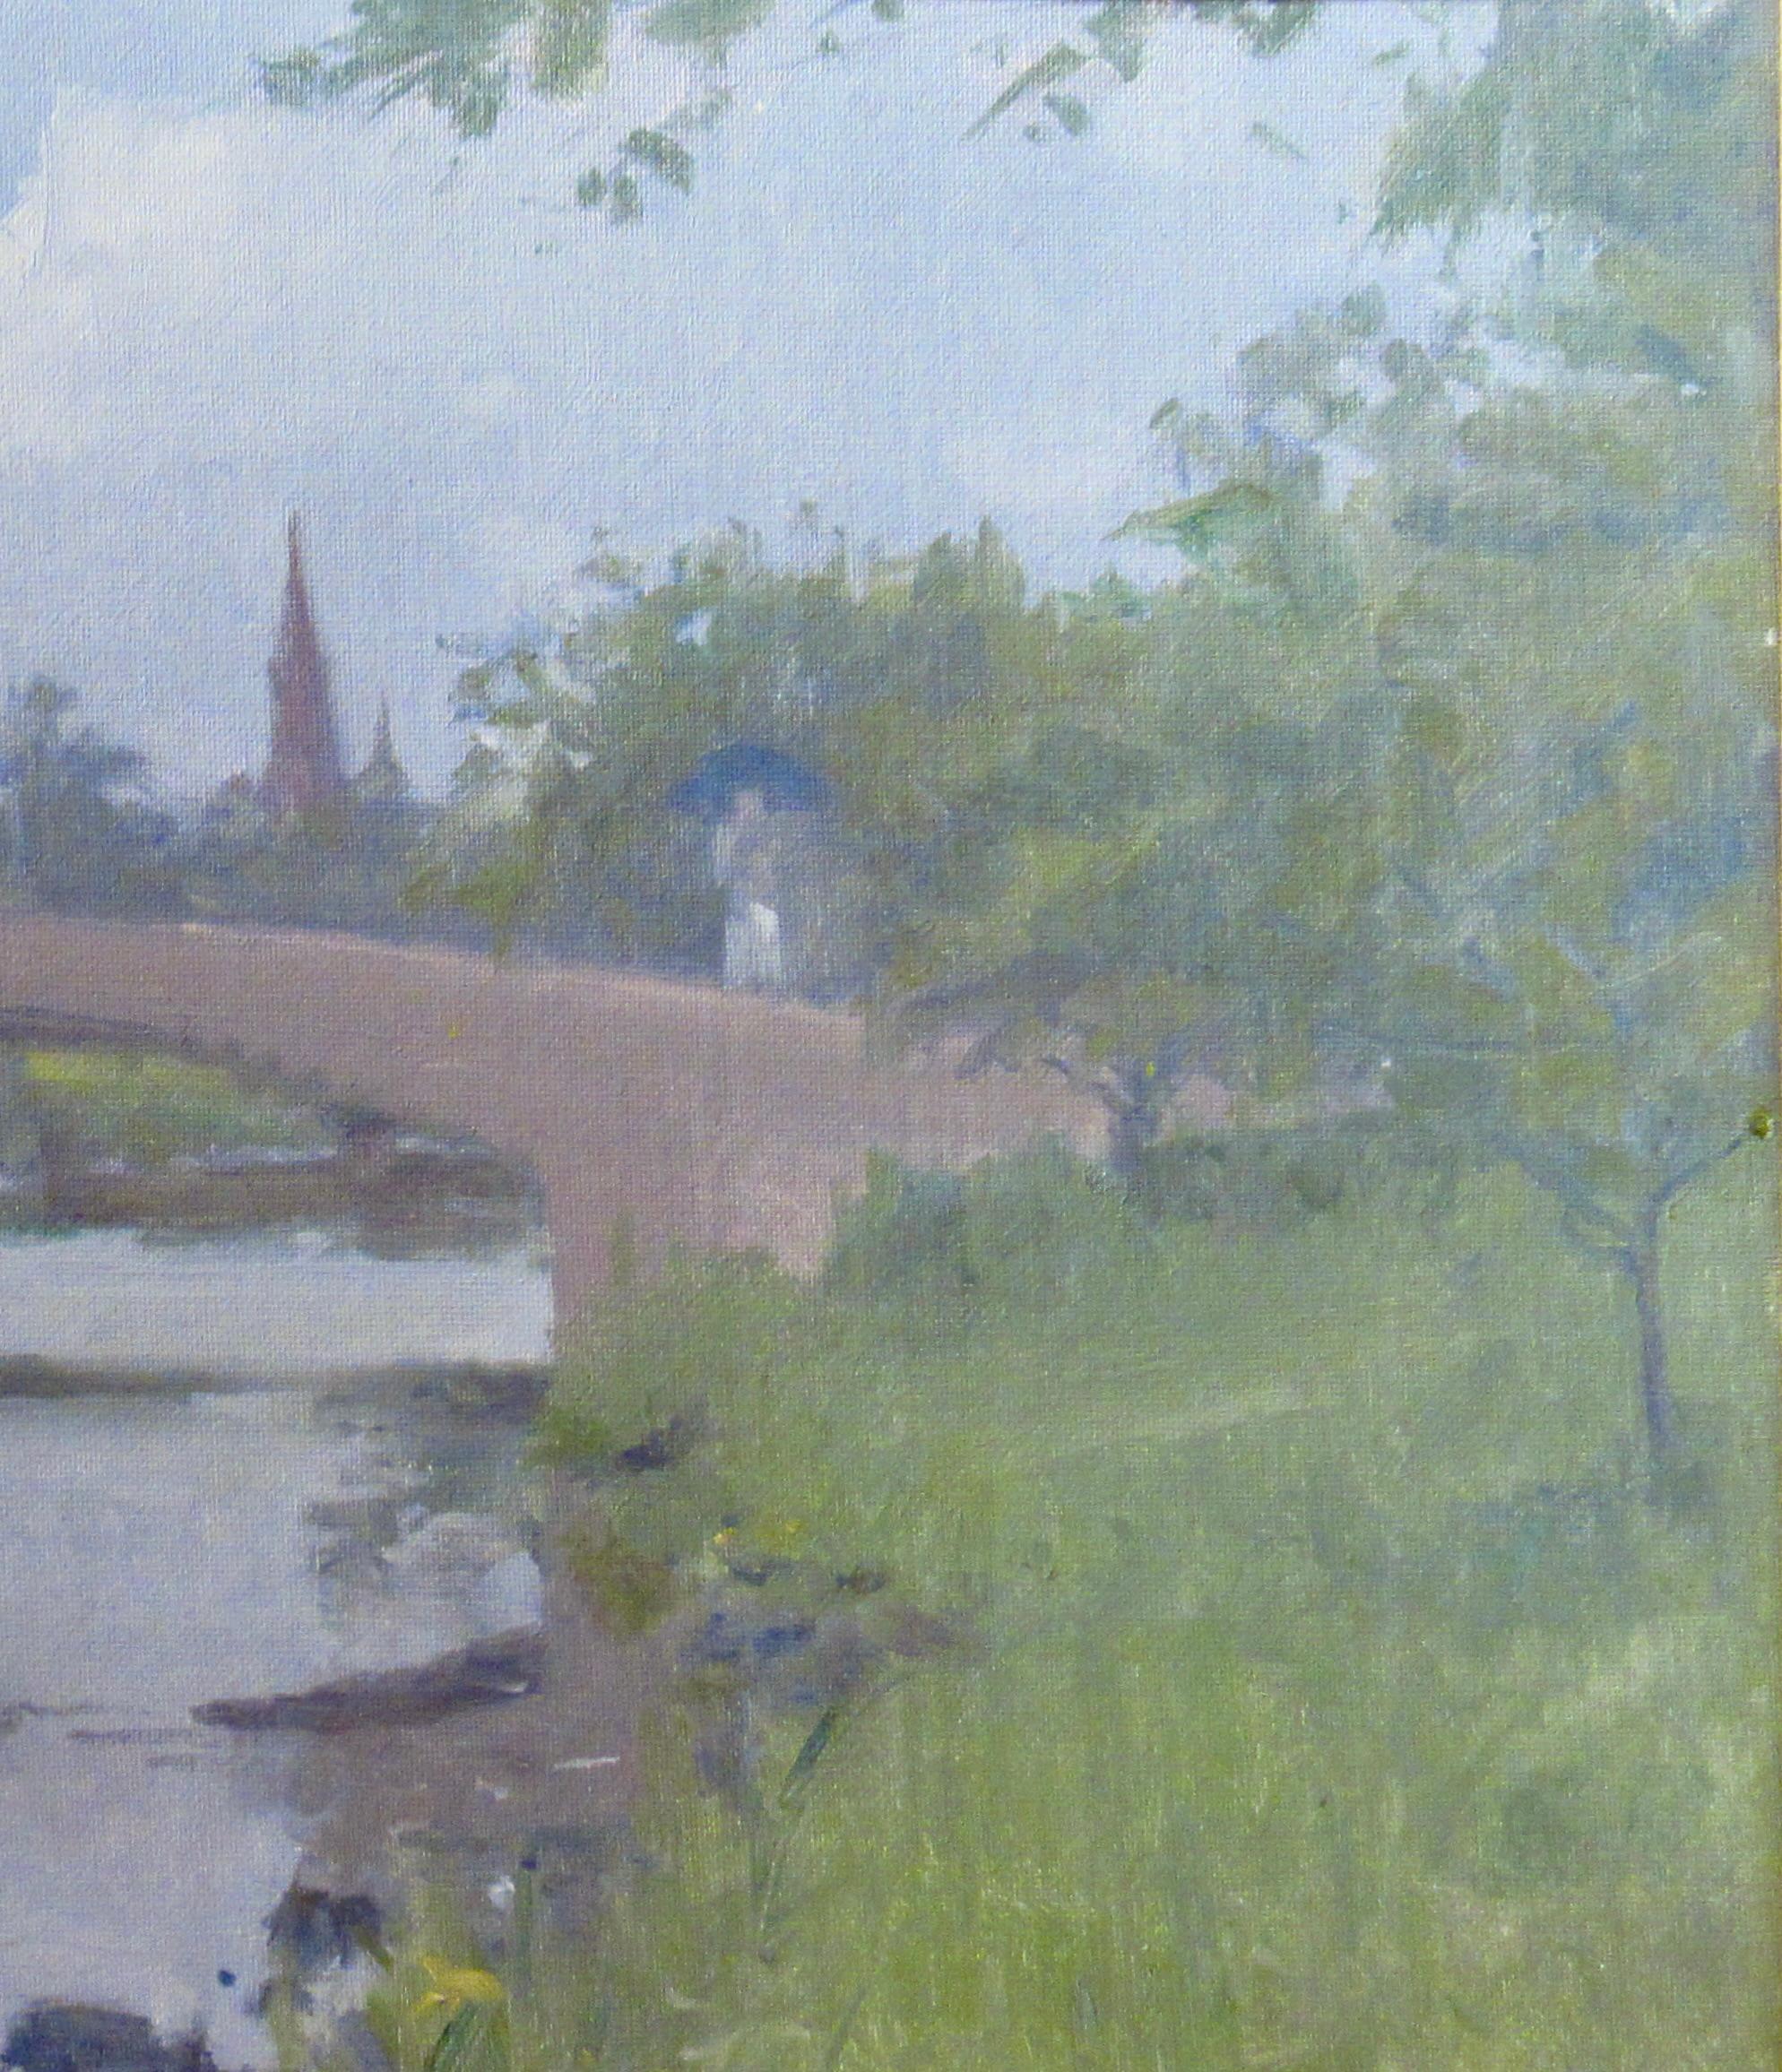 Landscape with Bridge - American Impressionist Painting by David P. Curtis